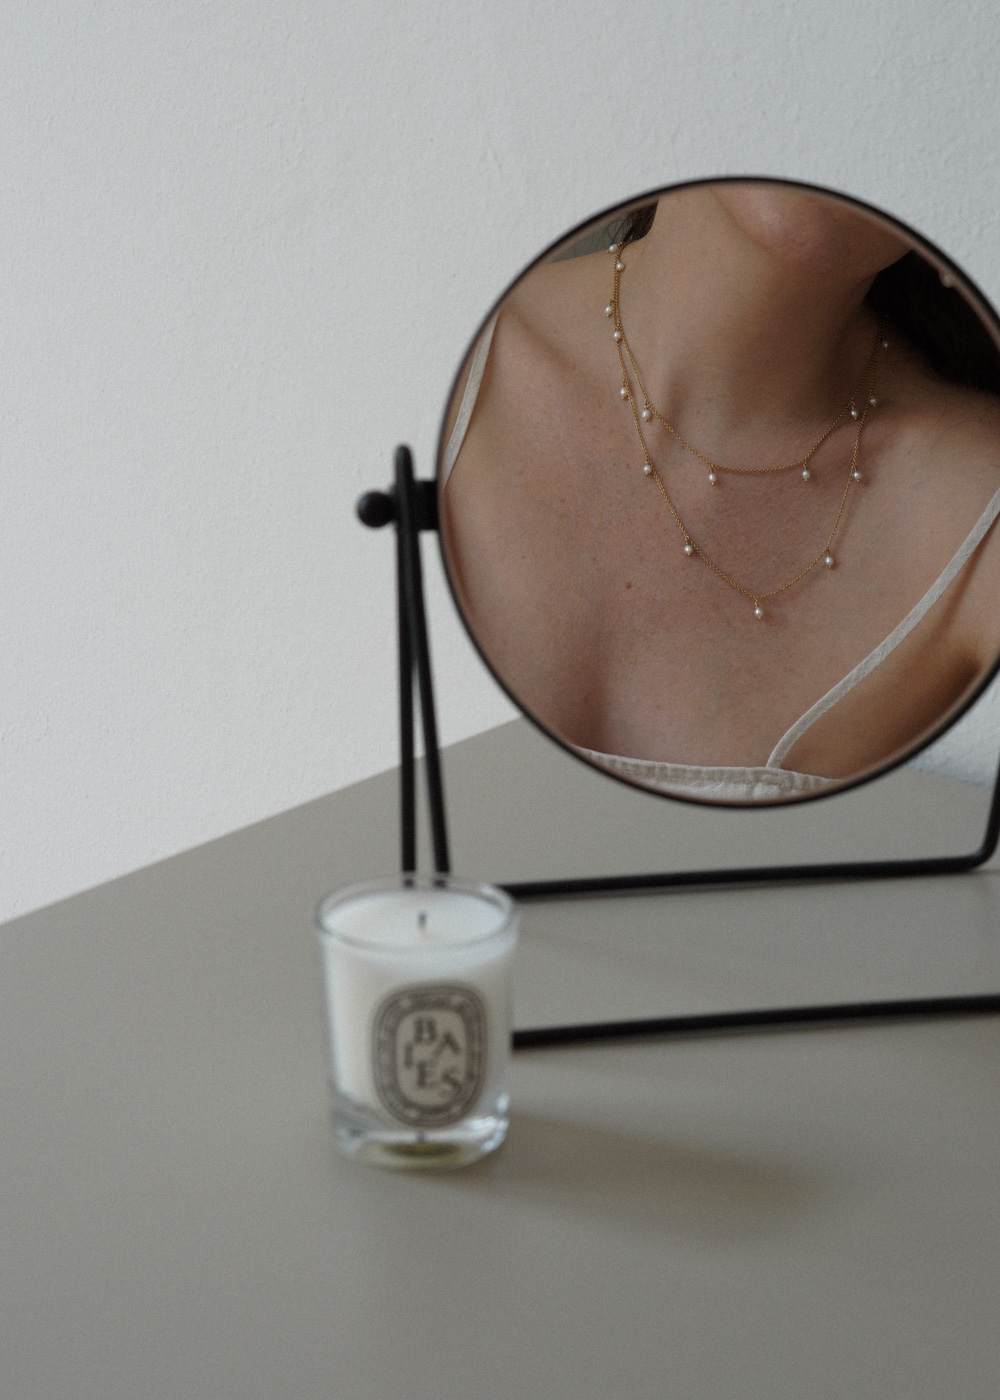 BRUNA The Label Gold Necklace Jewelry Handcrafted Jewellery Dainty Aesthetic Style Sustainable Fashion Minimal Timeless Summer Outfit RG Daily Rebecca Goddard Neutral (20)